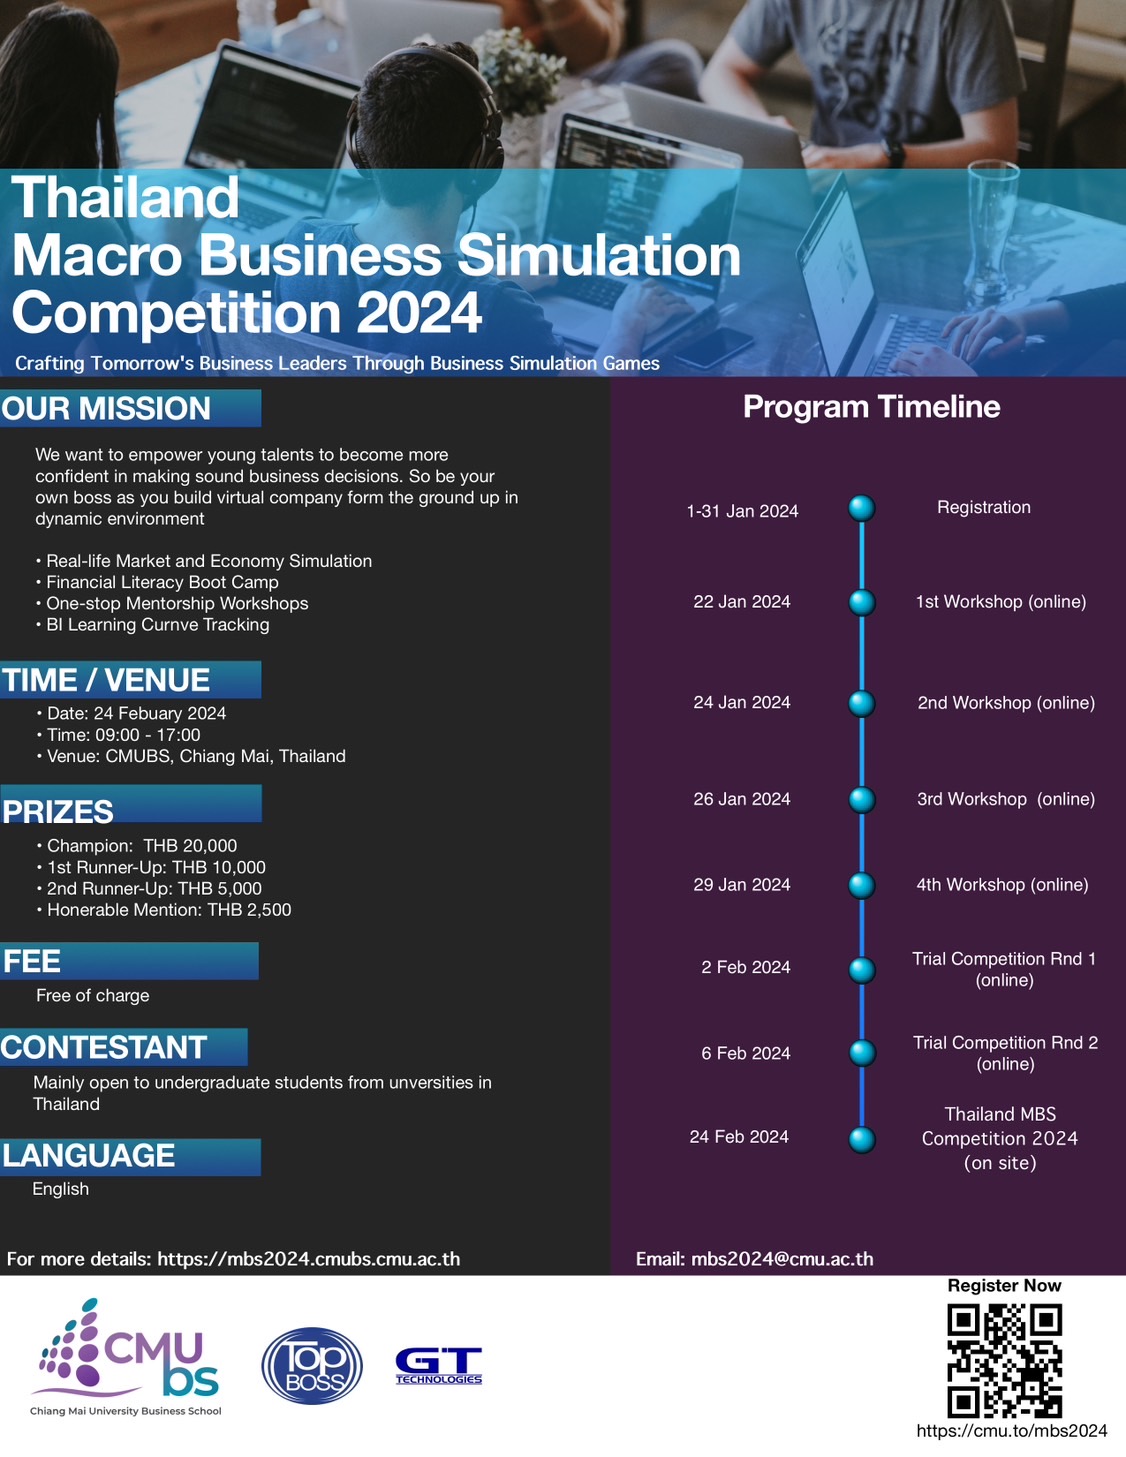 MBS COMPETITION THAILAND 2024